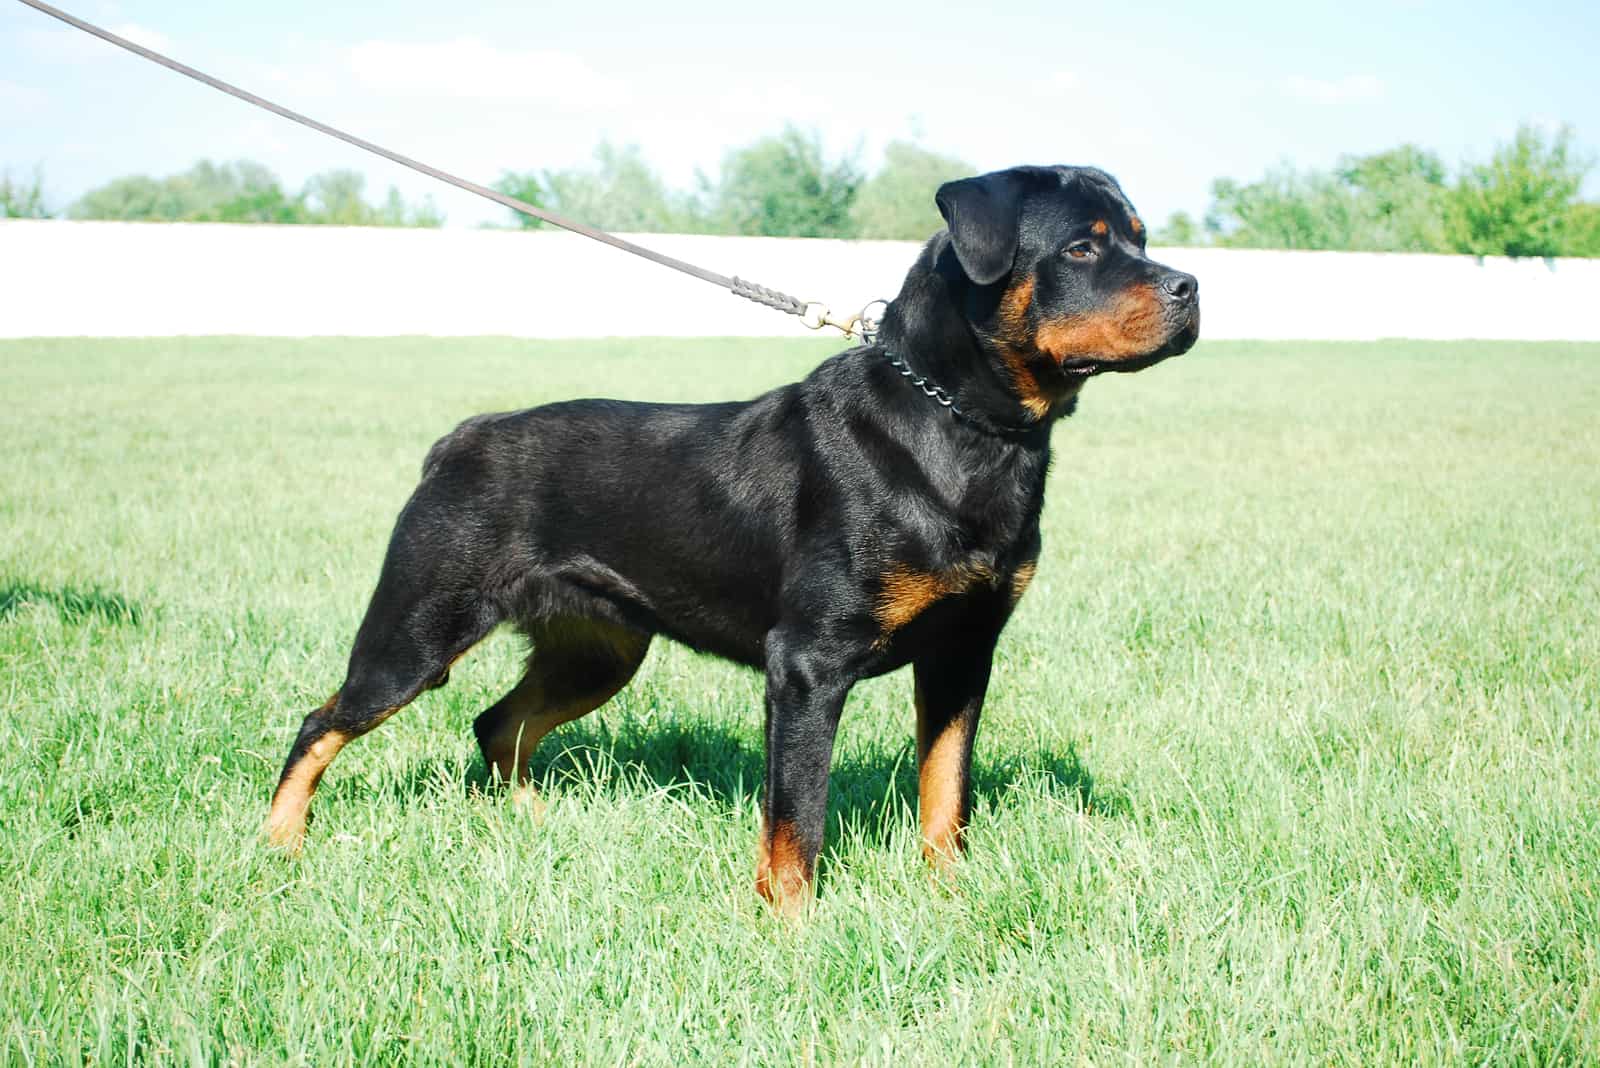 Rottweiler on the leash is watching something closely